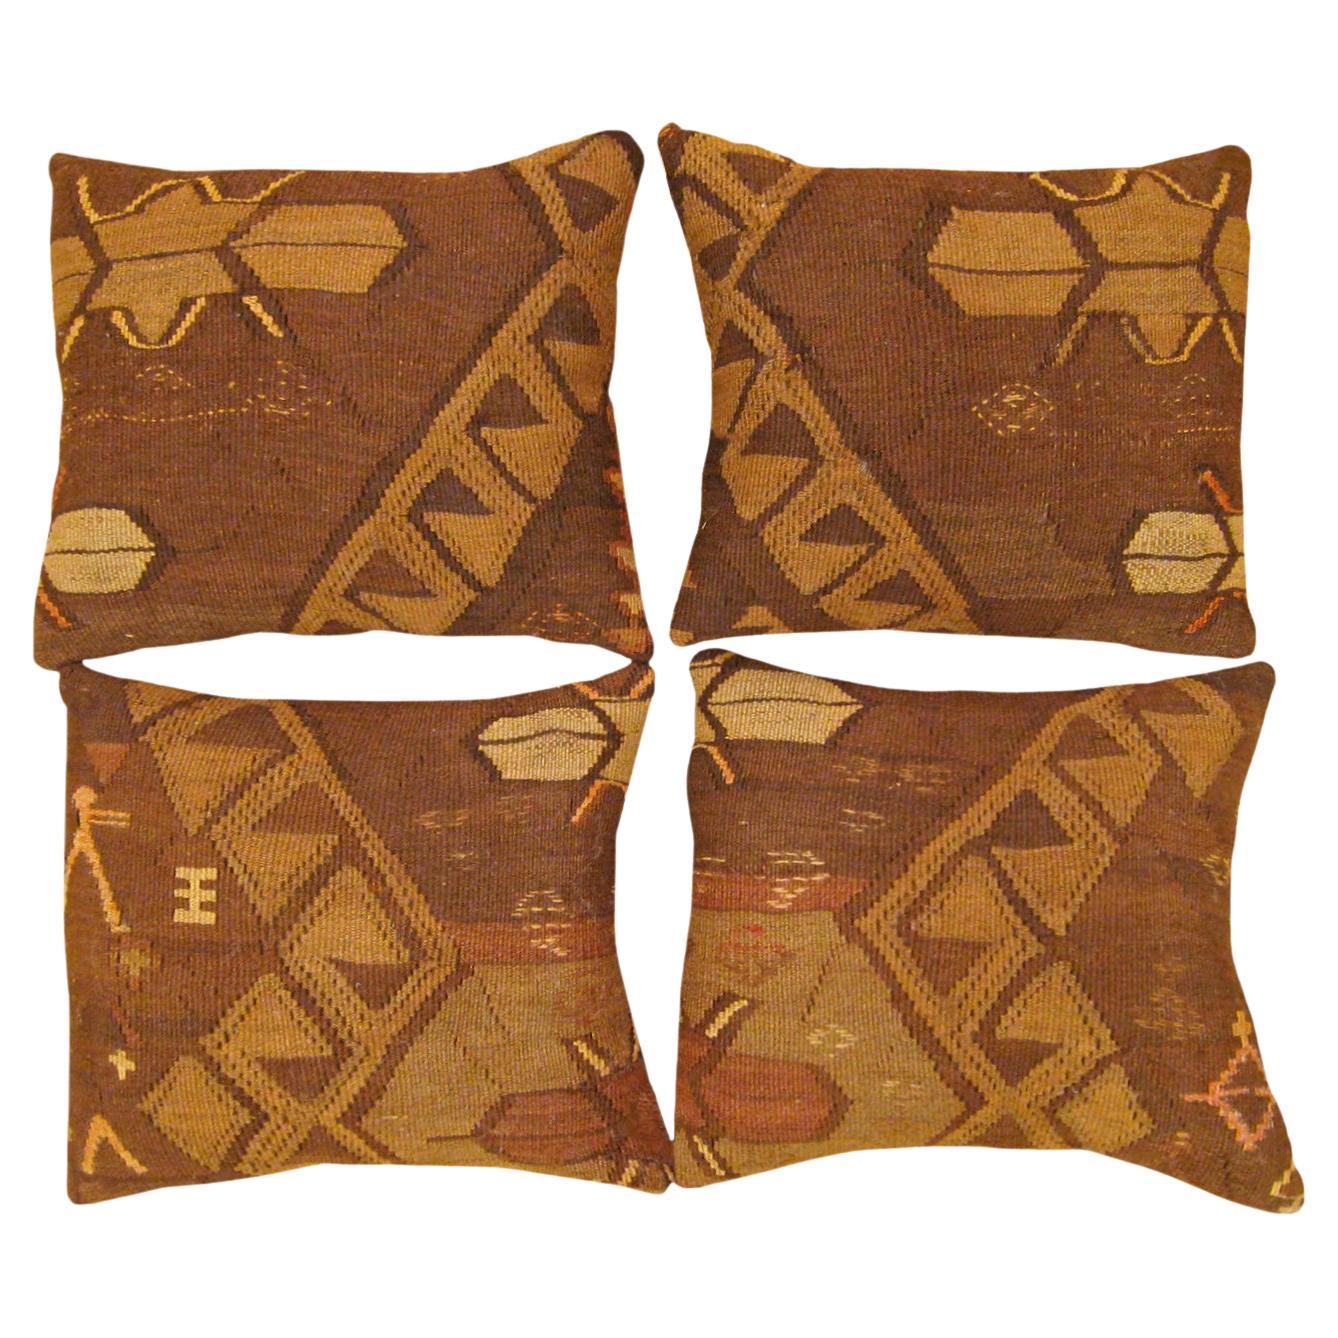 A Set of Decorative Vintage Turkish Kilim Pillows with Geometric Abstracts For Sale